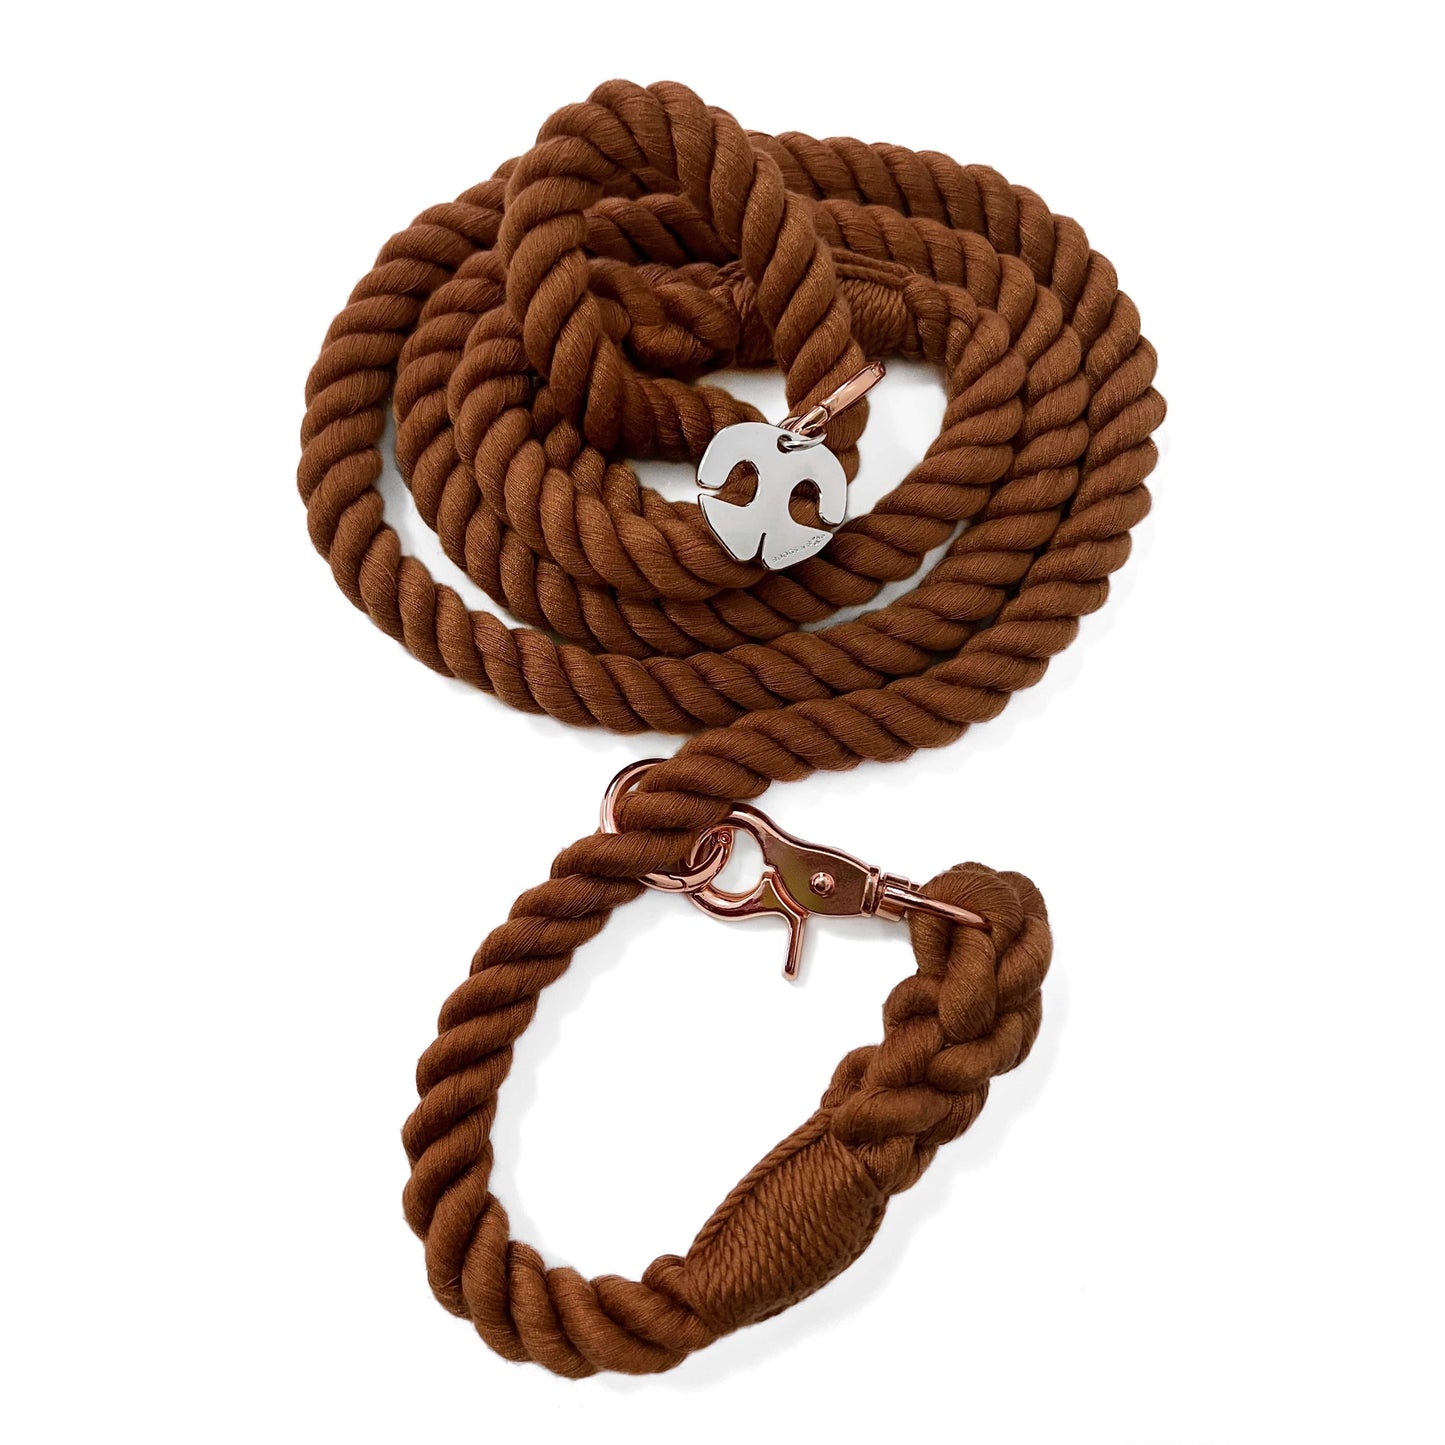 Shop Rope Leash with Collar - Walnut Brown by Boogs & Boop.